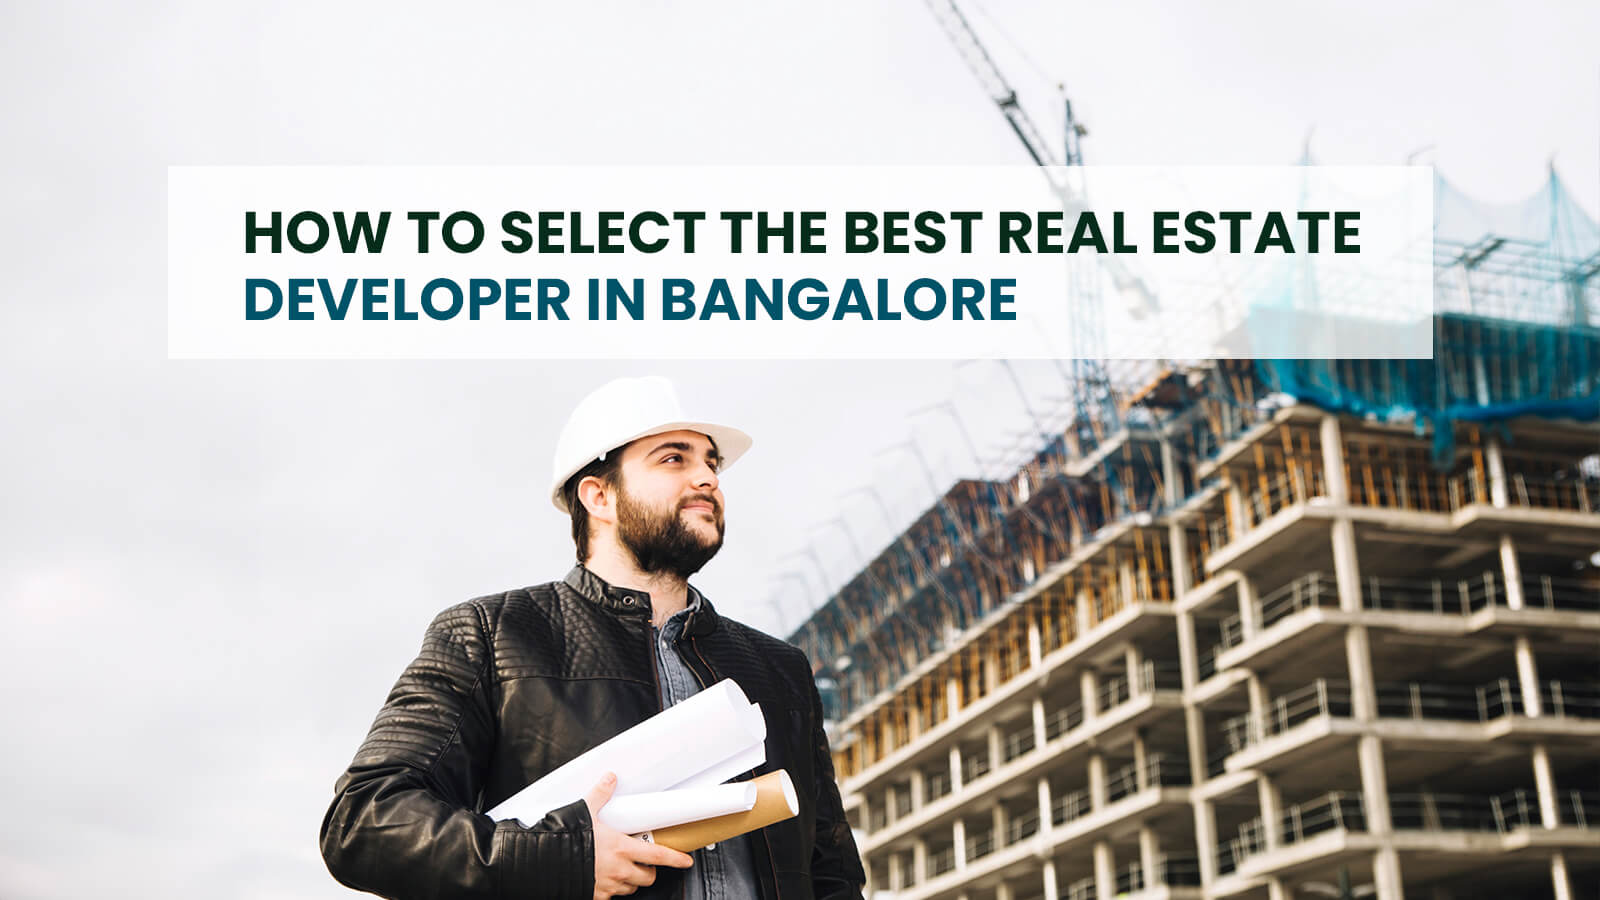 How To Select The Best Real Estate Developer in Bangalore